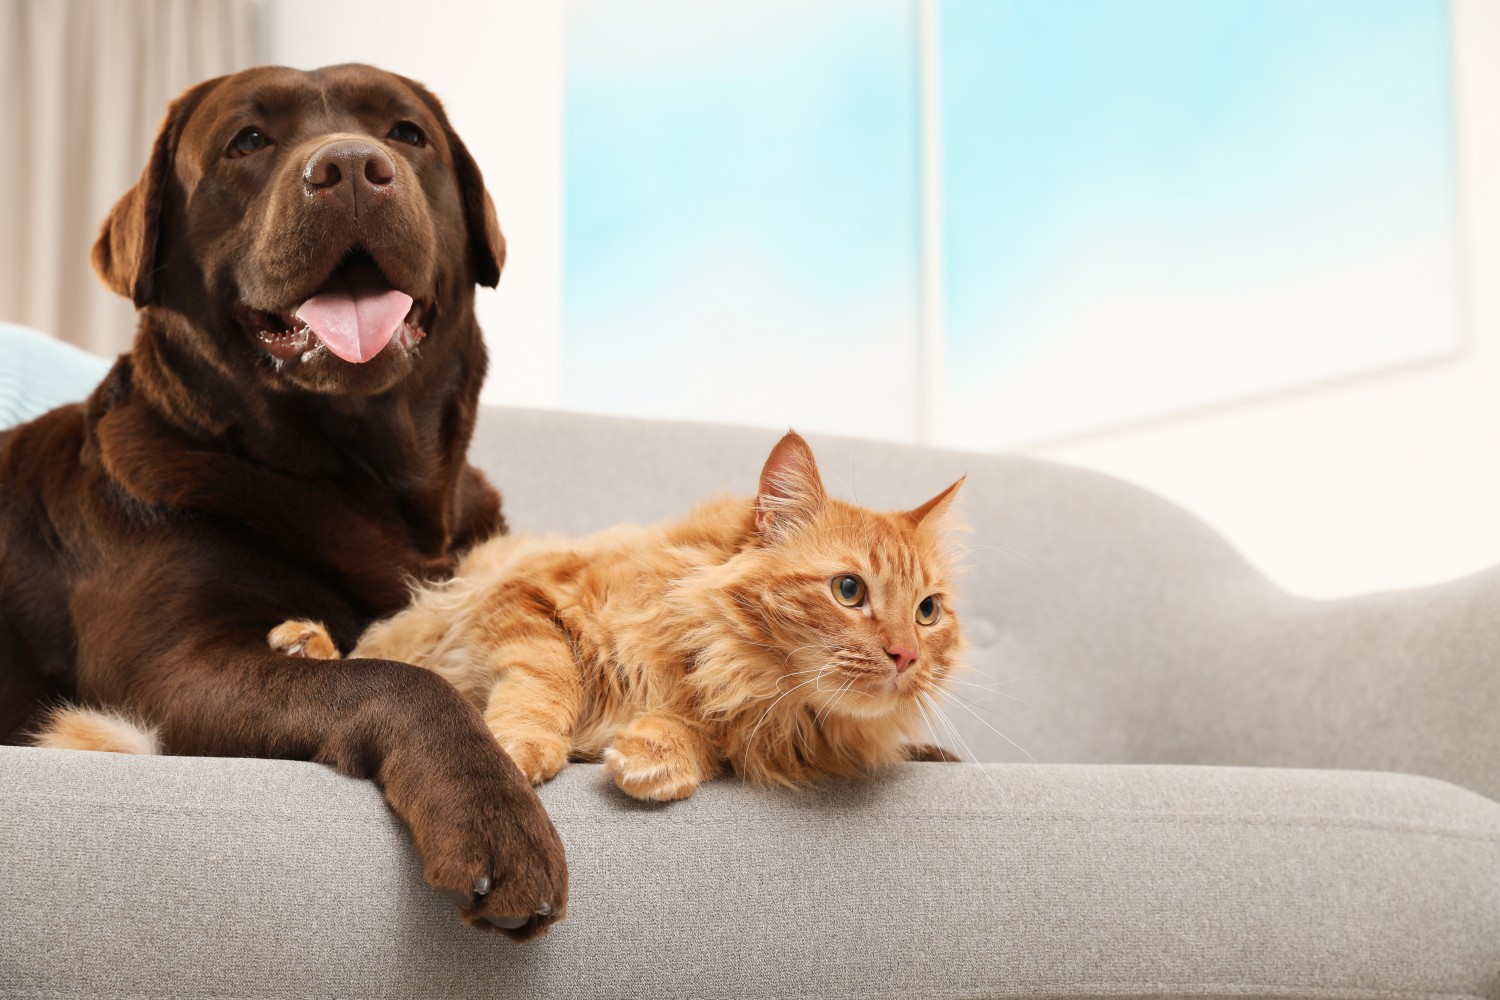 House Calls - Dog & Cat on Couch